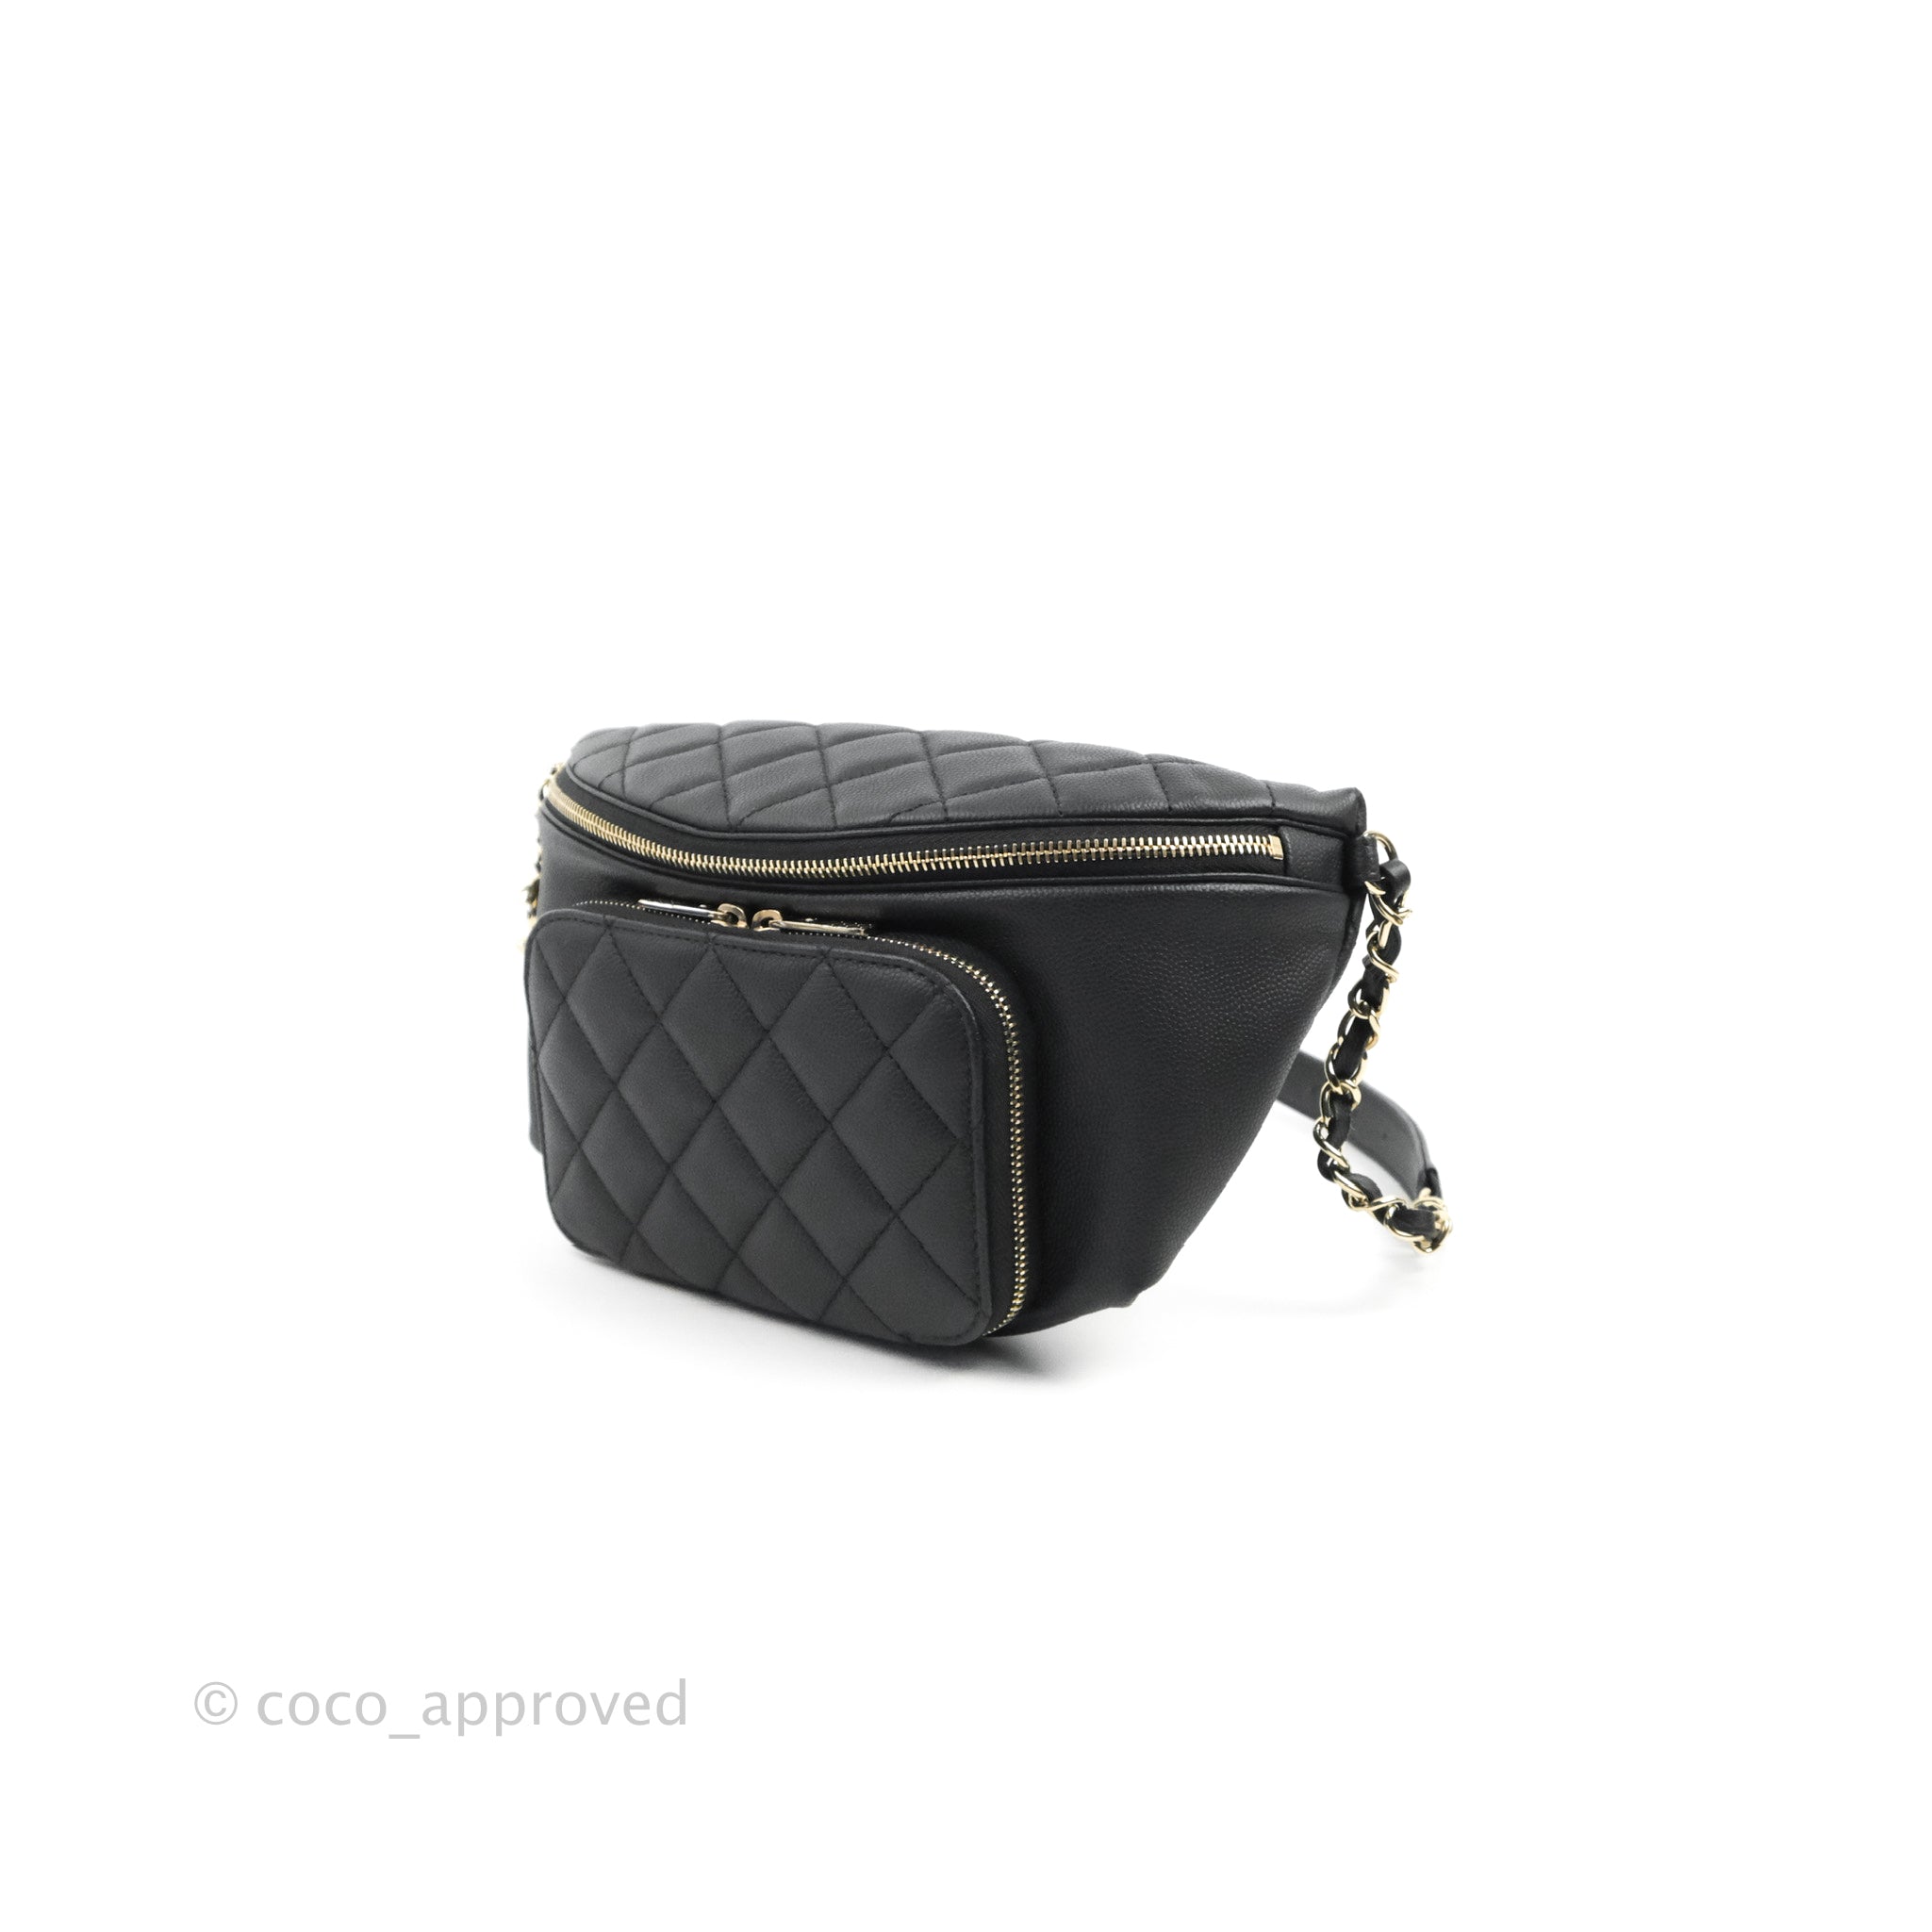 Vintage CHANEL 2.55 black fanny pack, belt bag with round flap and